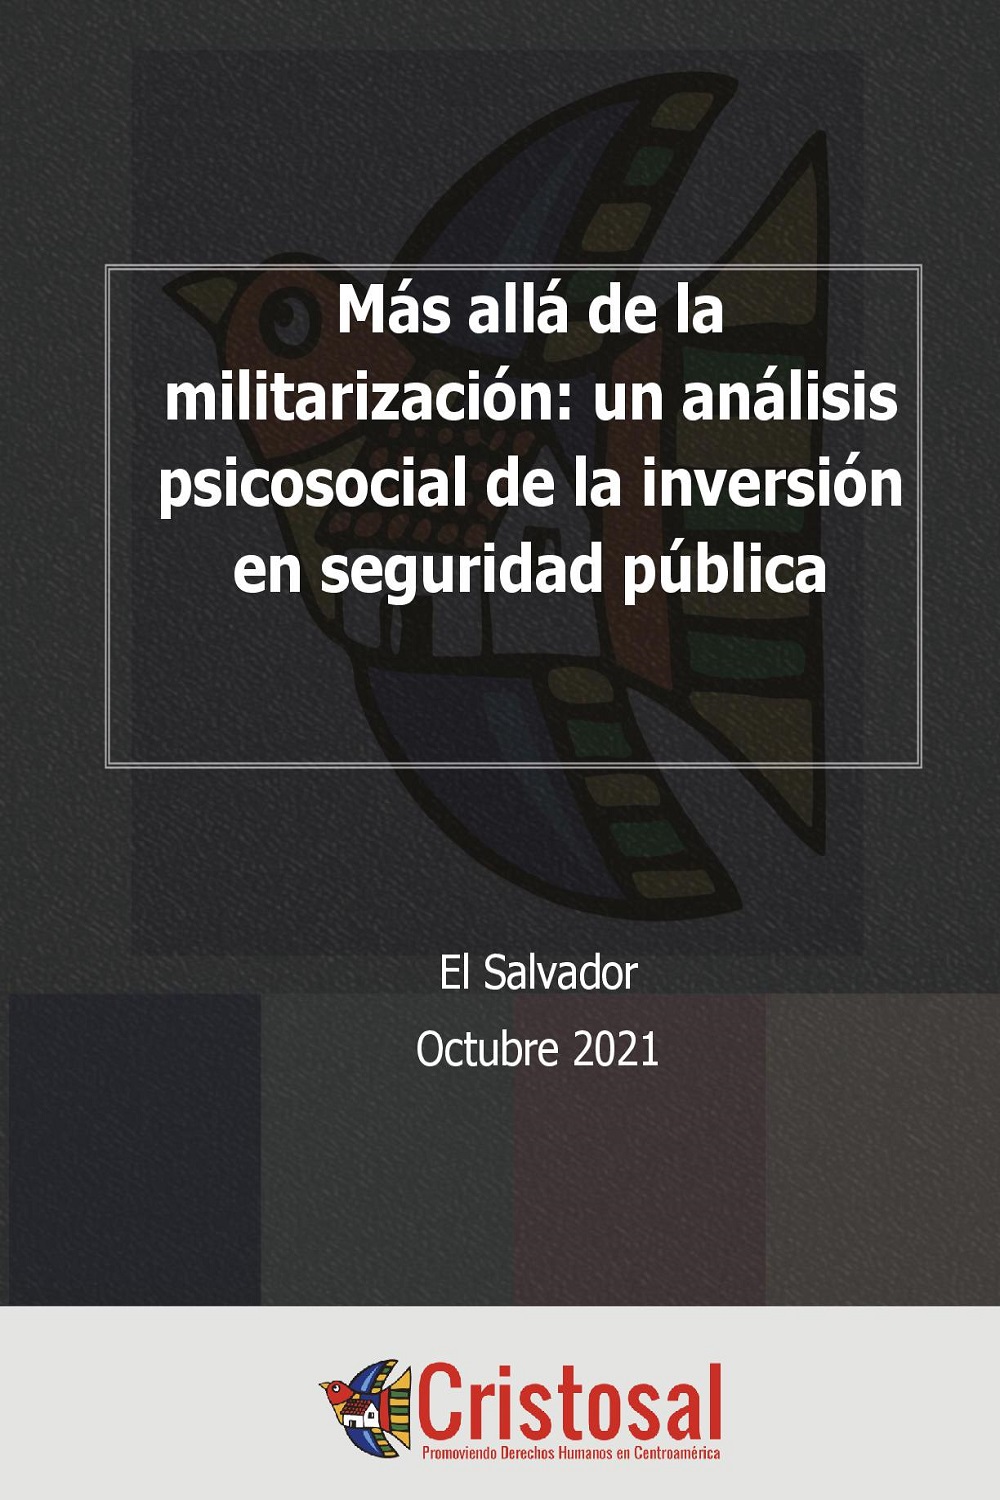 A Beyond militarization: a psychosocial analysis of investment in public security (Spanish)